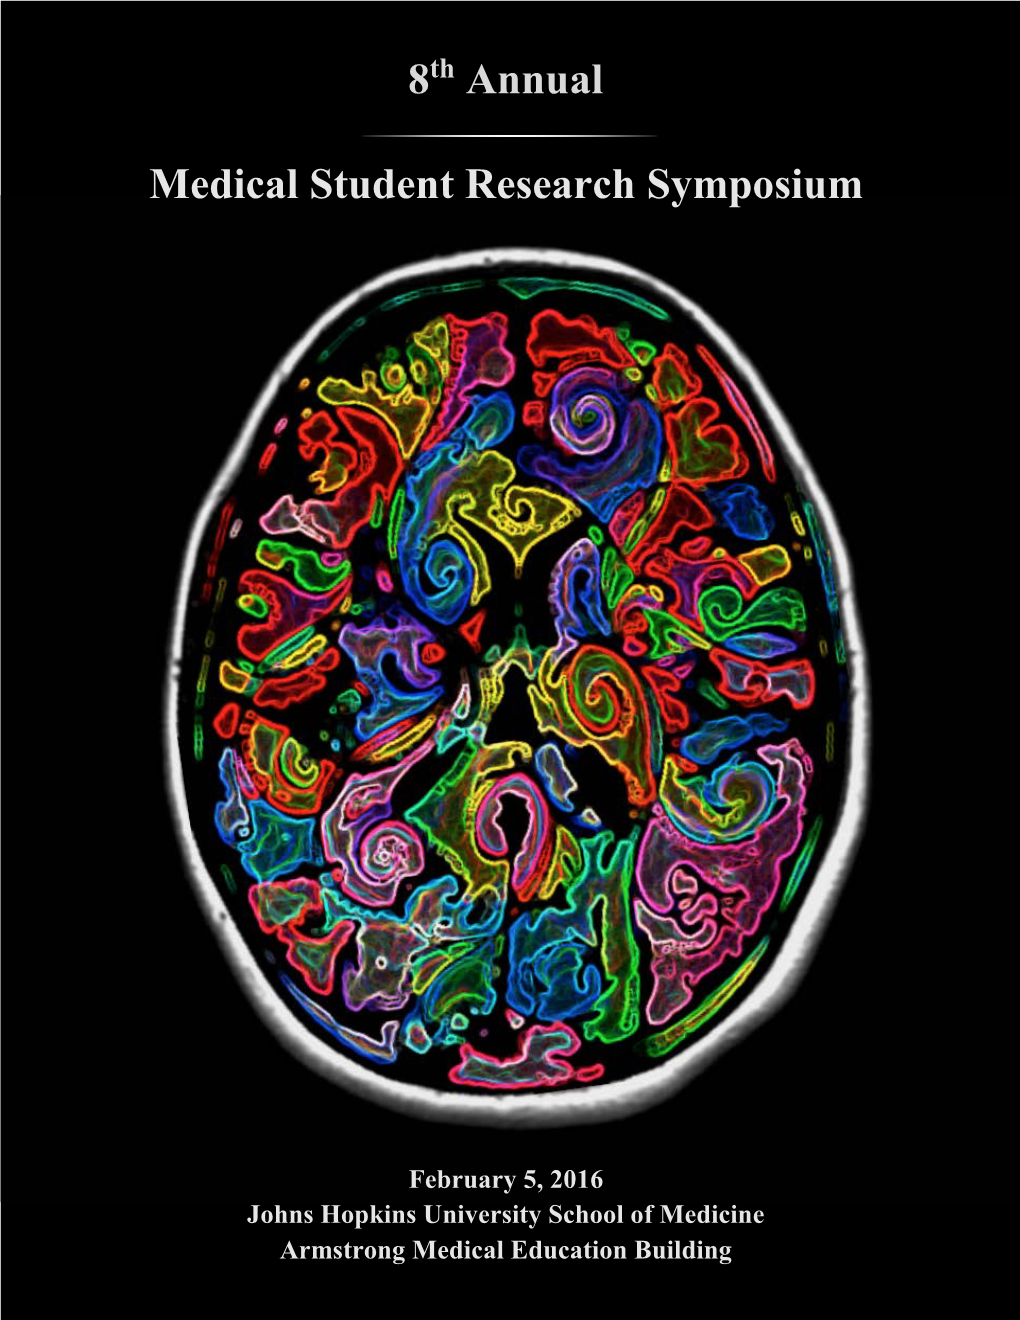 Medical Student Research Symposium 2016